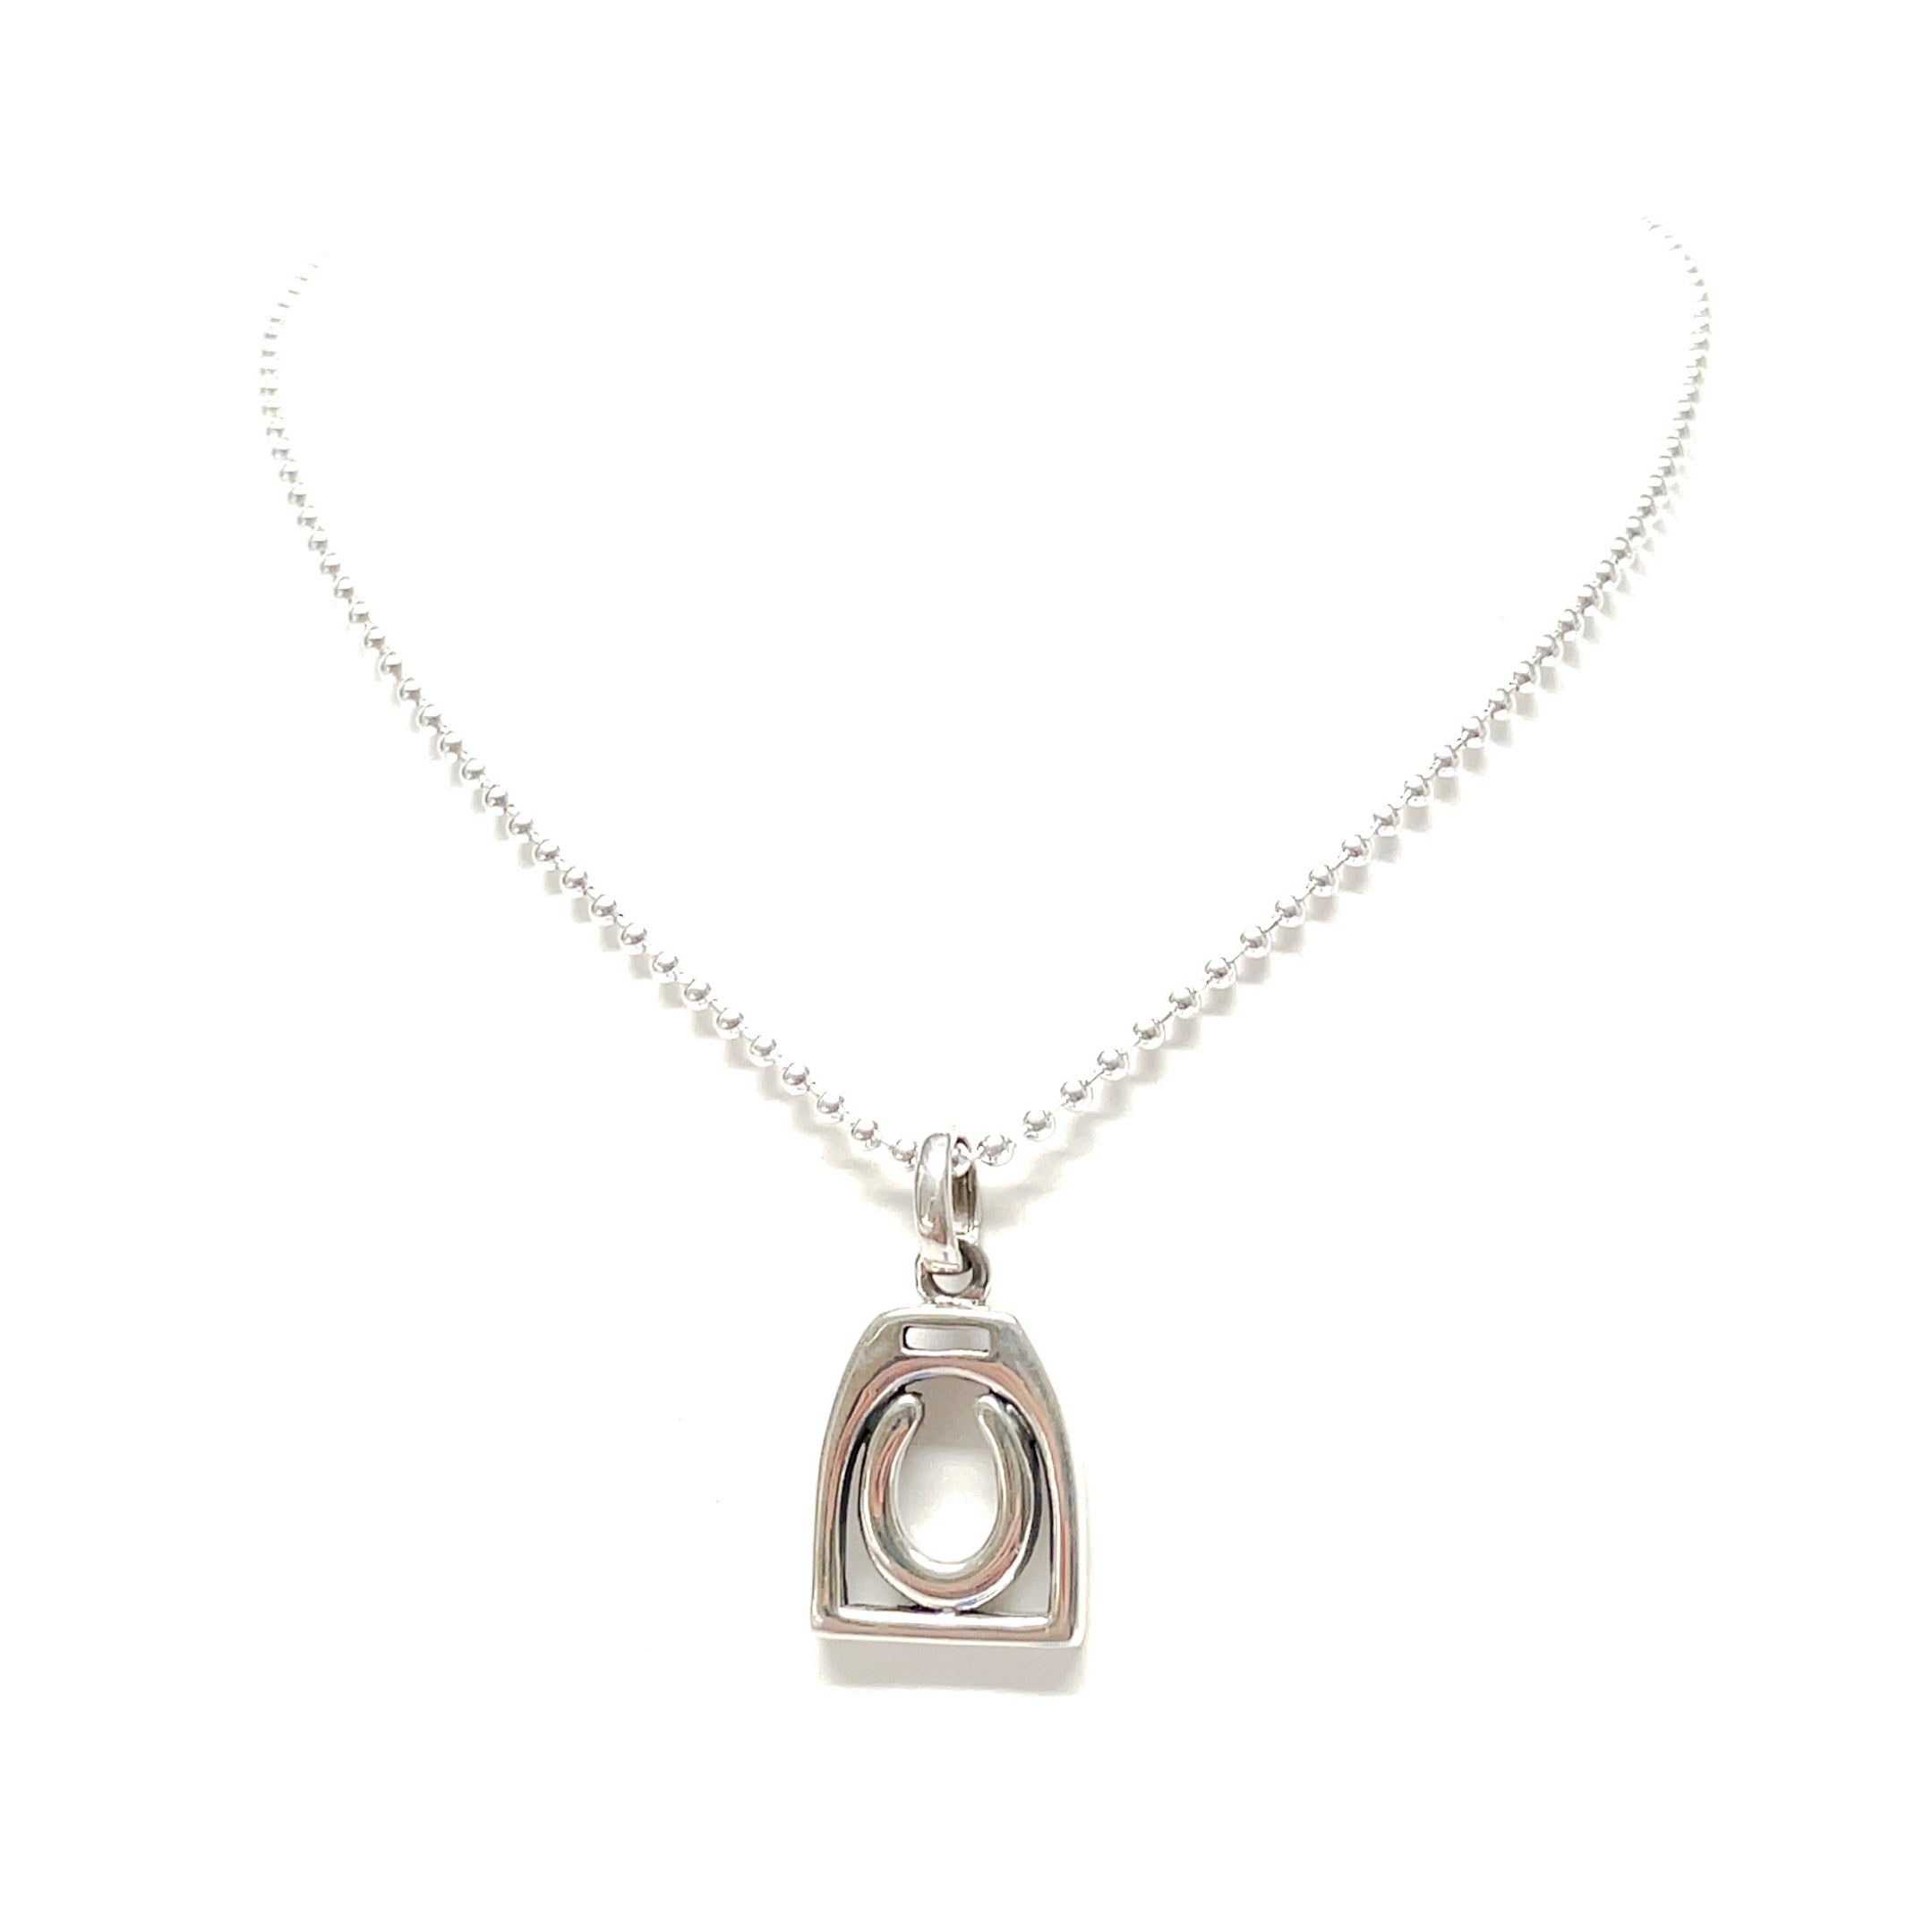 Sterling silver horseshoe and stirrup pendant